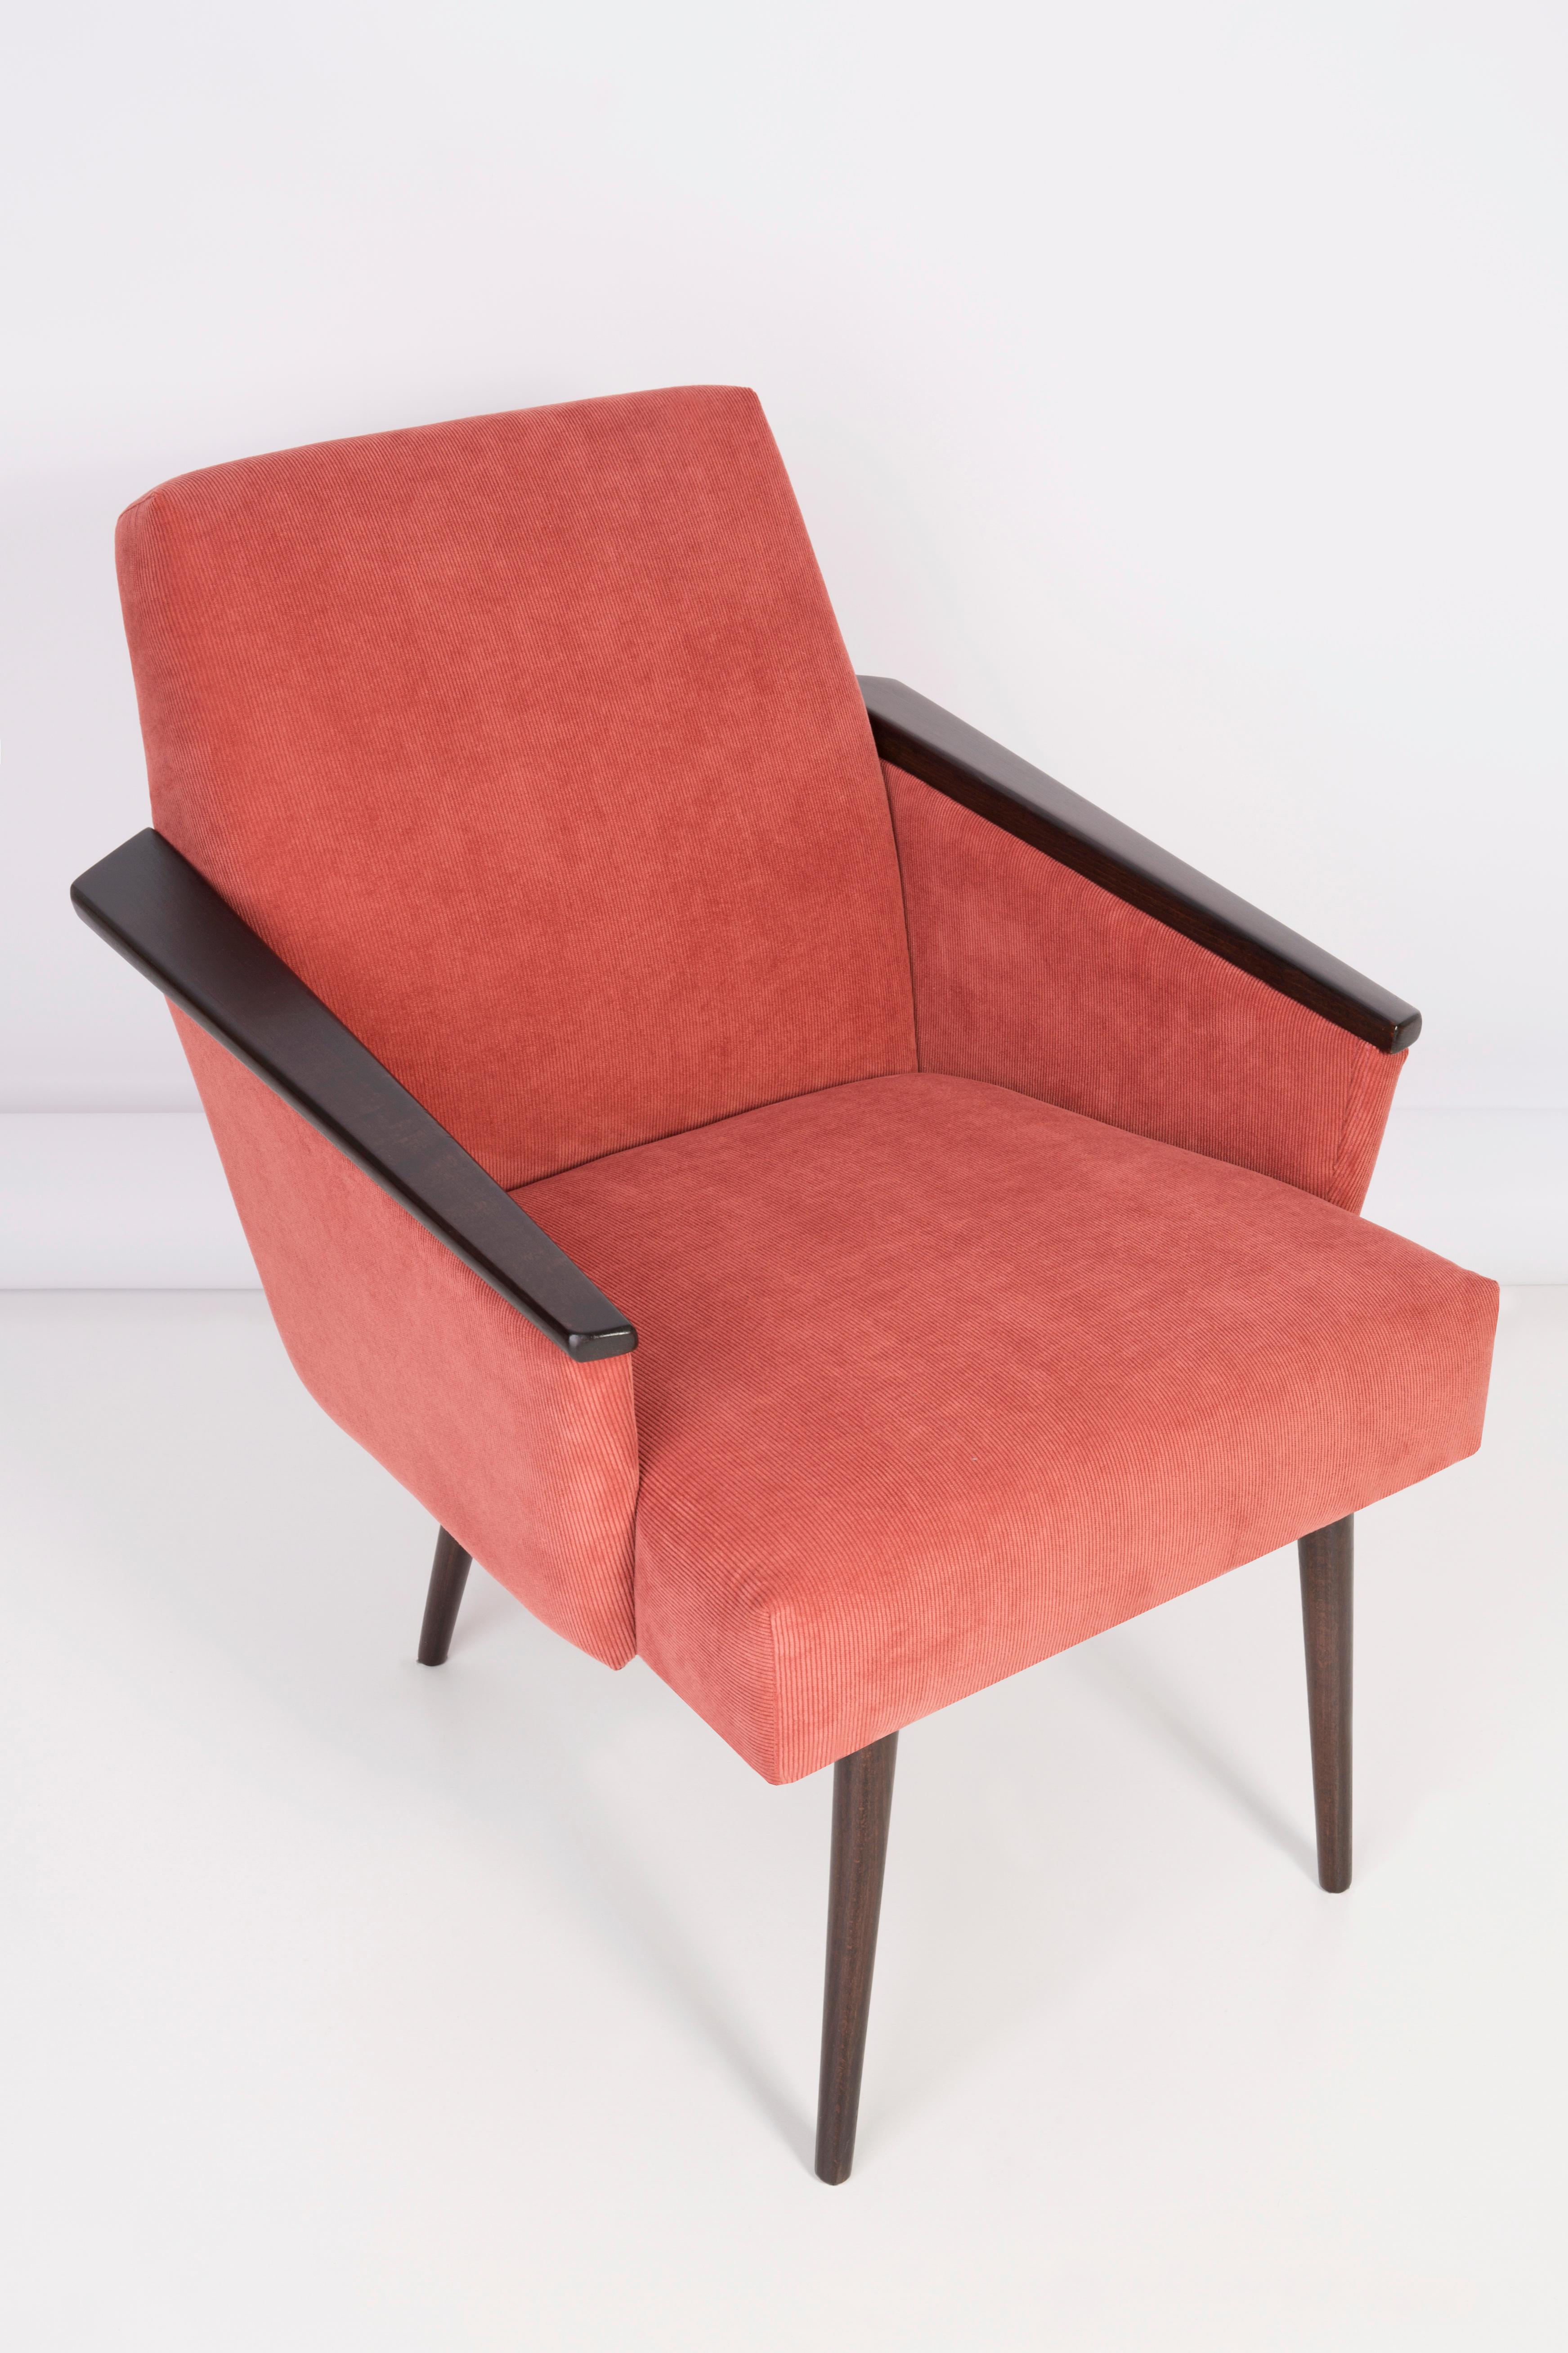 German armchair produced in the 1960s in Berlin. The armchair is after a thorough renovation of upholstery and carpentry. The wooden frame is thoroughly cleaned and covered with a semi-matte varnish in the color of a palisander. The upholstery is